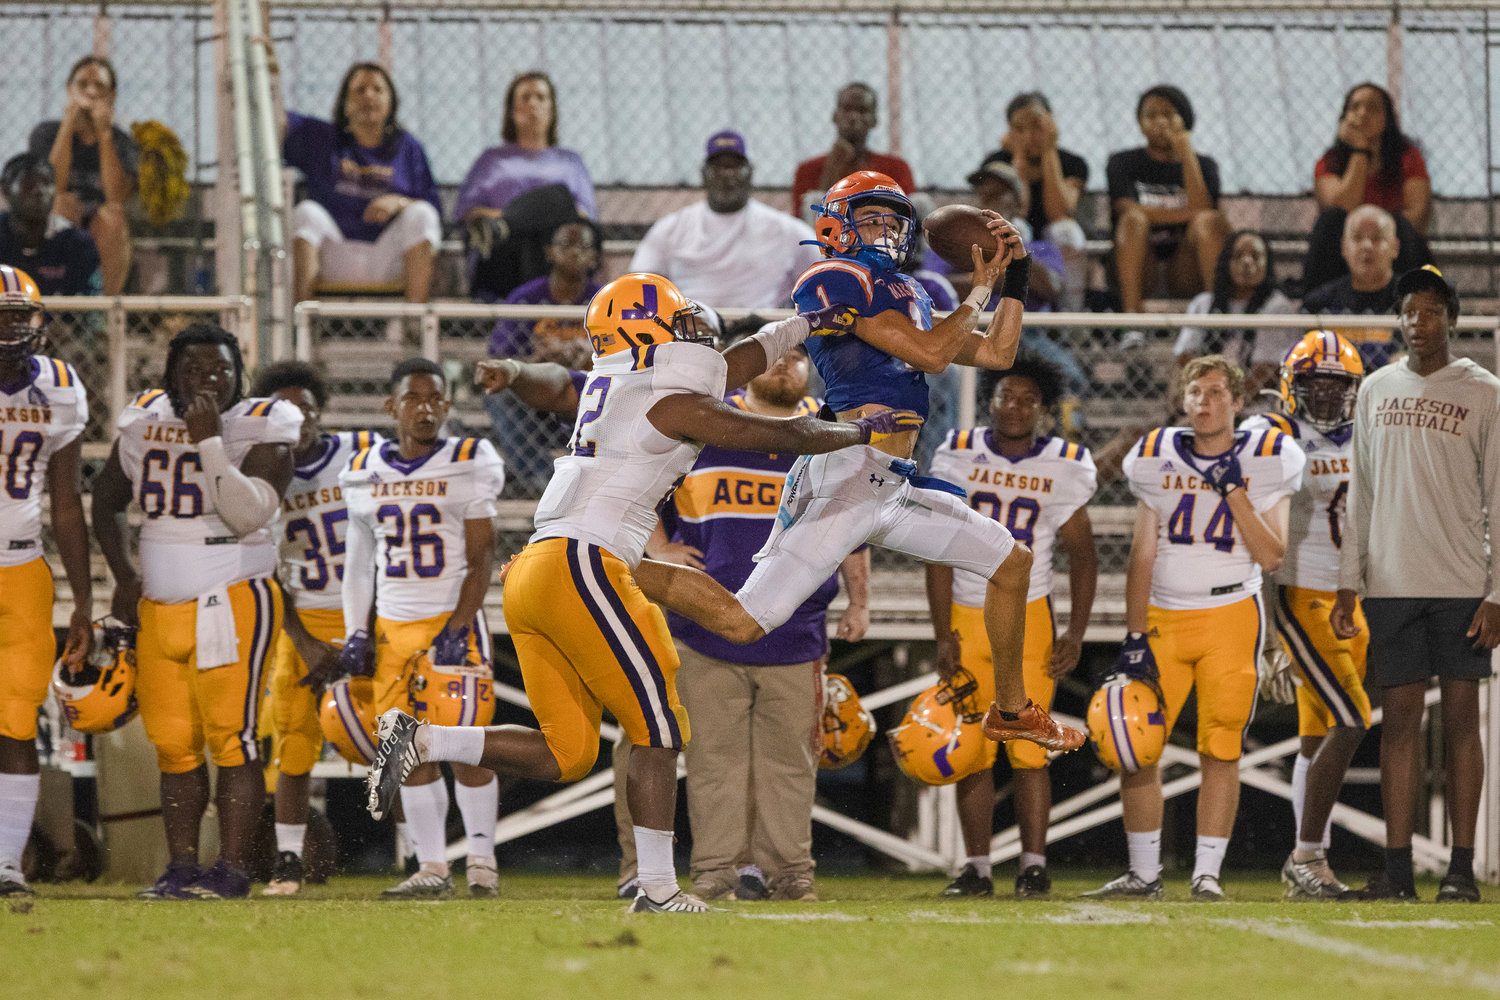 Orange Beach athlete John Wallace Holladay looks in a catch in the Makos’ Sept. 2 region game against Jackson at home. Last week, Holladay caught three of Cash Turner’s four passing touchdowns in Orange Beach’s 37-12 win over Satsuma on the road.